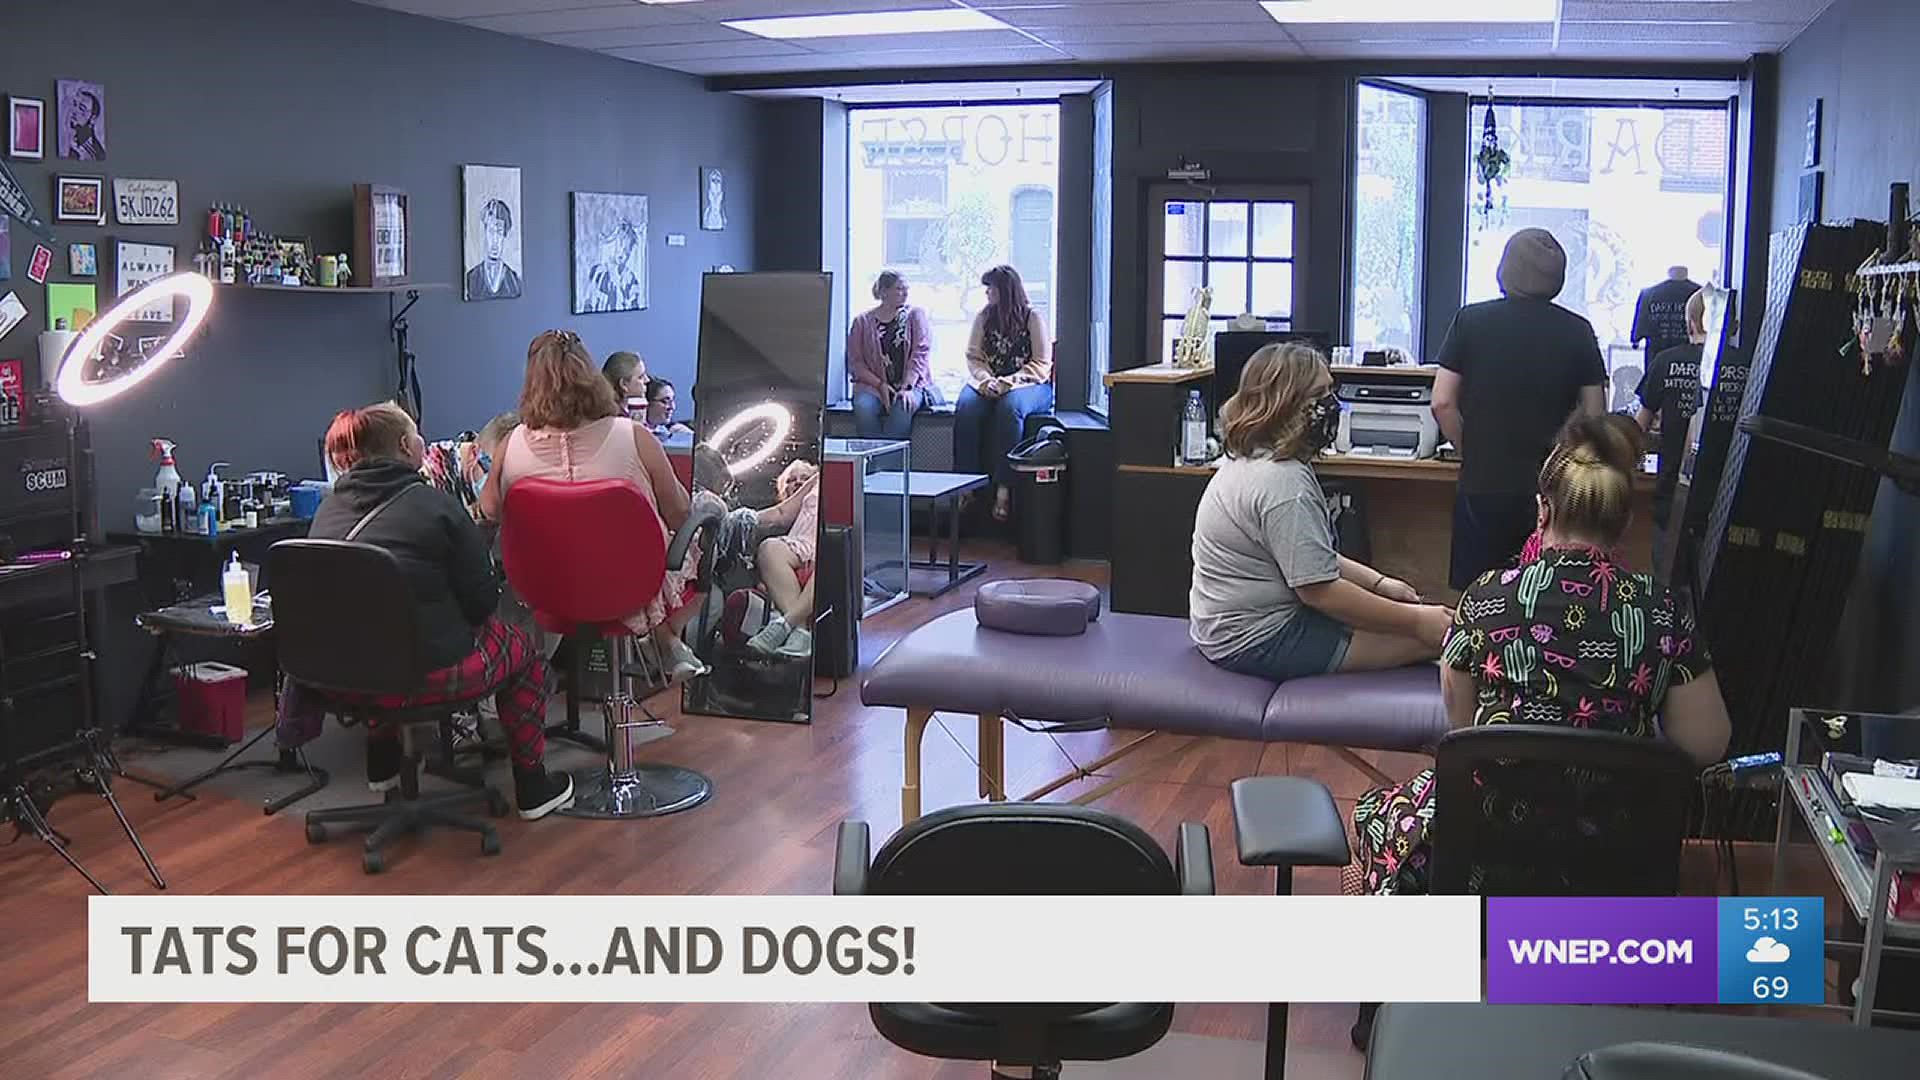 A tattoo shop in Danville is teaming up with the Animal Resource Center in Millville to raise funds for furry friends.